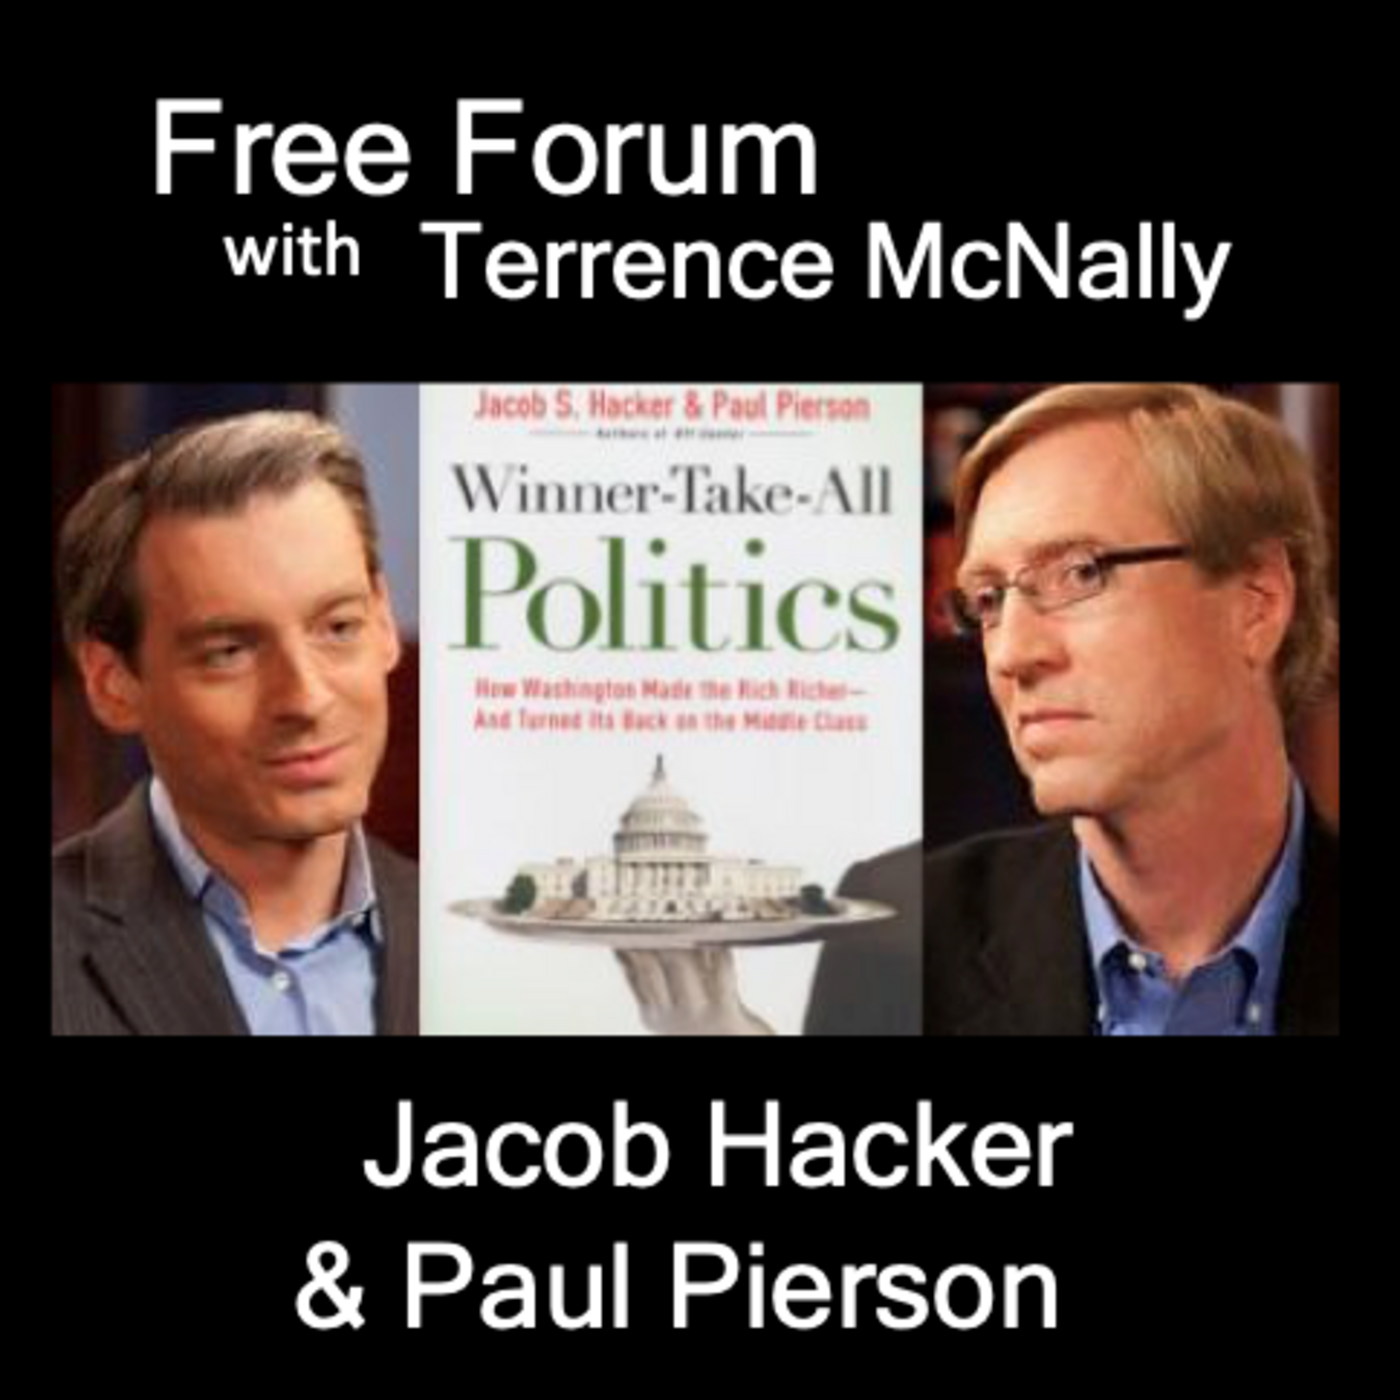 Episode 515: WINNER-TAKE-ALL POLITICS-JACOB HACKER & PAUL PIERSON (2011) Best book on How DC Turned Its Back on the Middle Class